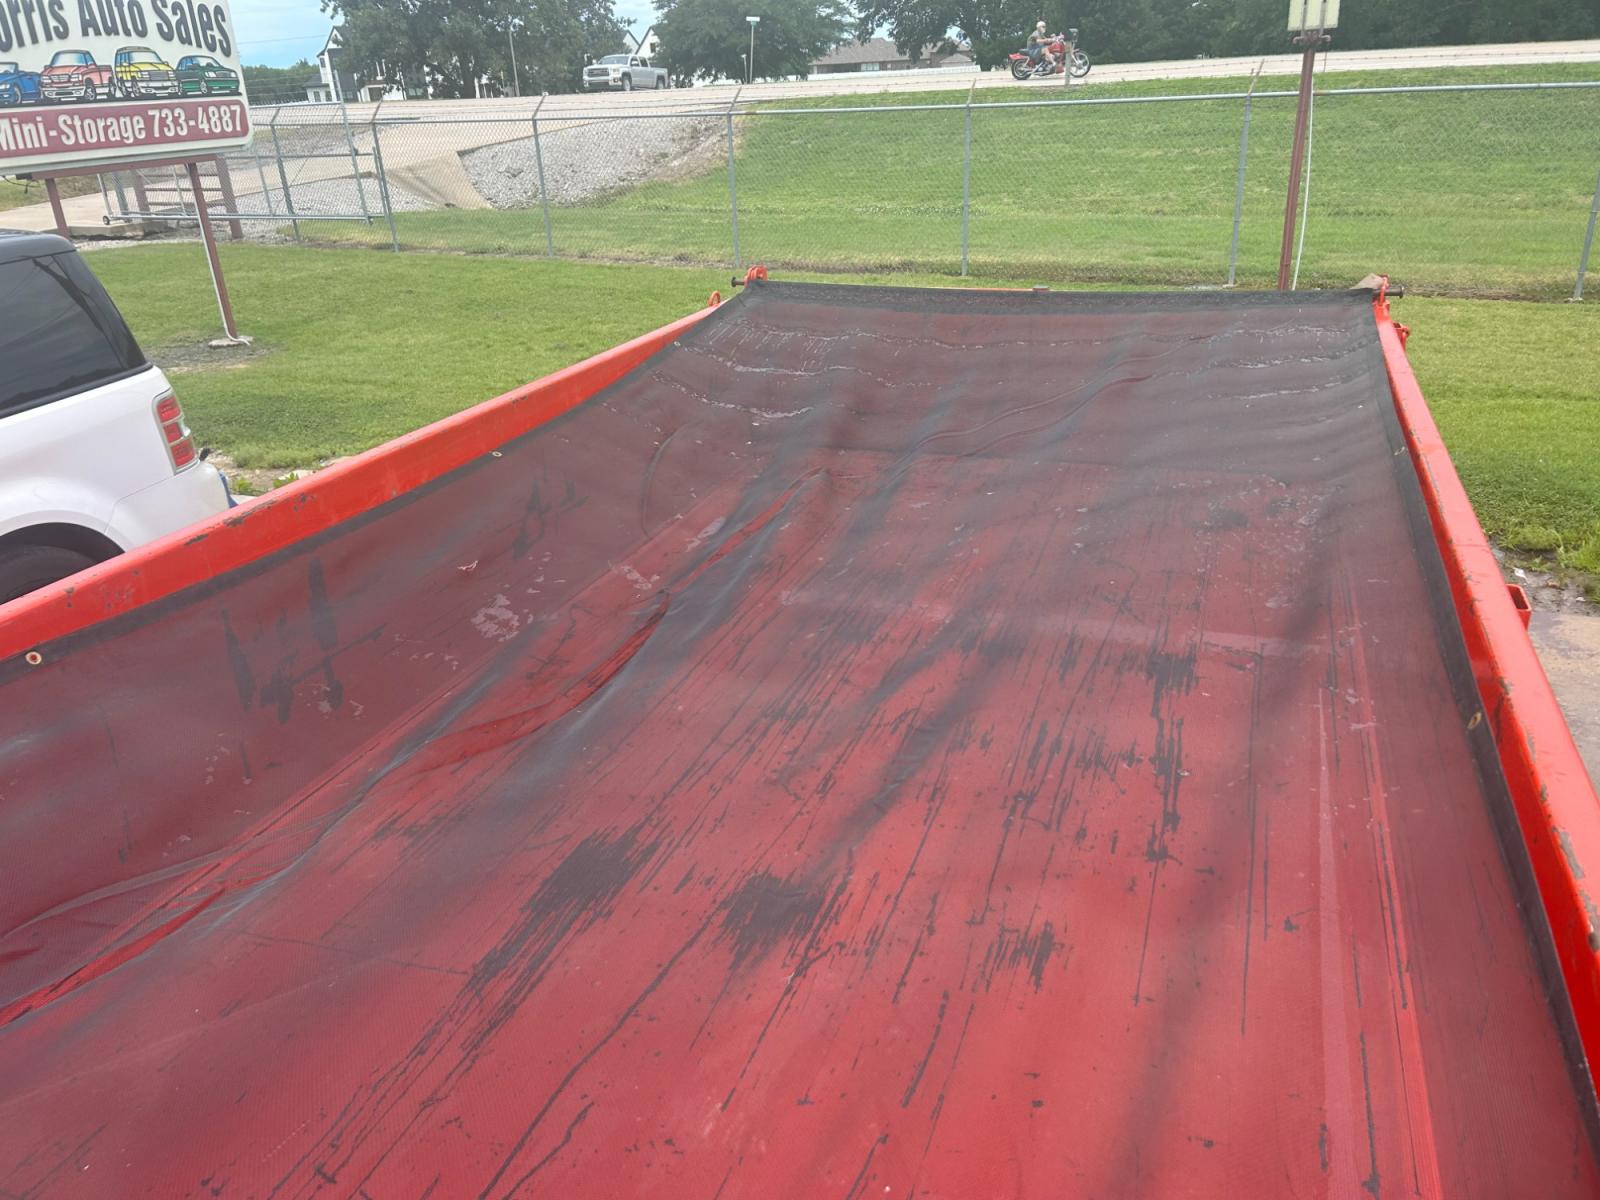 2023 ORANGE EAST TEXAS TRAILER DUMPBED (58SBD1627PE) , located at 17760 Hwy 62, Morris, OK, 74445, 35.609104, -95.877060 - 2023 EAST TEXAS DUMP BED TRAILER IS 16X83, 14,000 GVWR, 2-7000 LB DEXTER ELECTRIC BREAK SYSTEM, TONGUE MOUNTED TOOL BOX, 7 GA FLOOR, 80" SLIDE IN RAMPS, 7 WAY PLUG, LED LIGHTS, 24" HIGH 10 GA. SIDES, 6" 12 LB I-BEAM FRAME, 6" 12 LB I-BEAM TONGUE. TITLE IN HAND. TRAILER IS BASICALLY NEW AND HAS ONLY - Photo #7